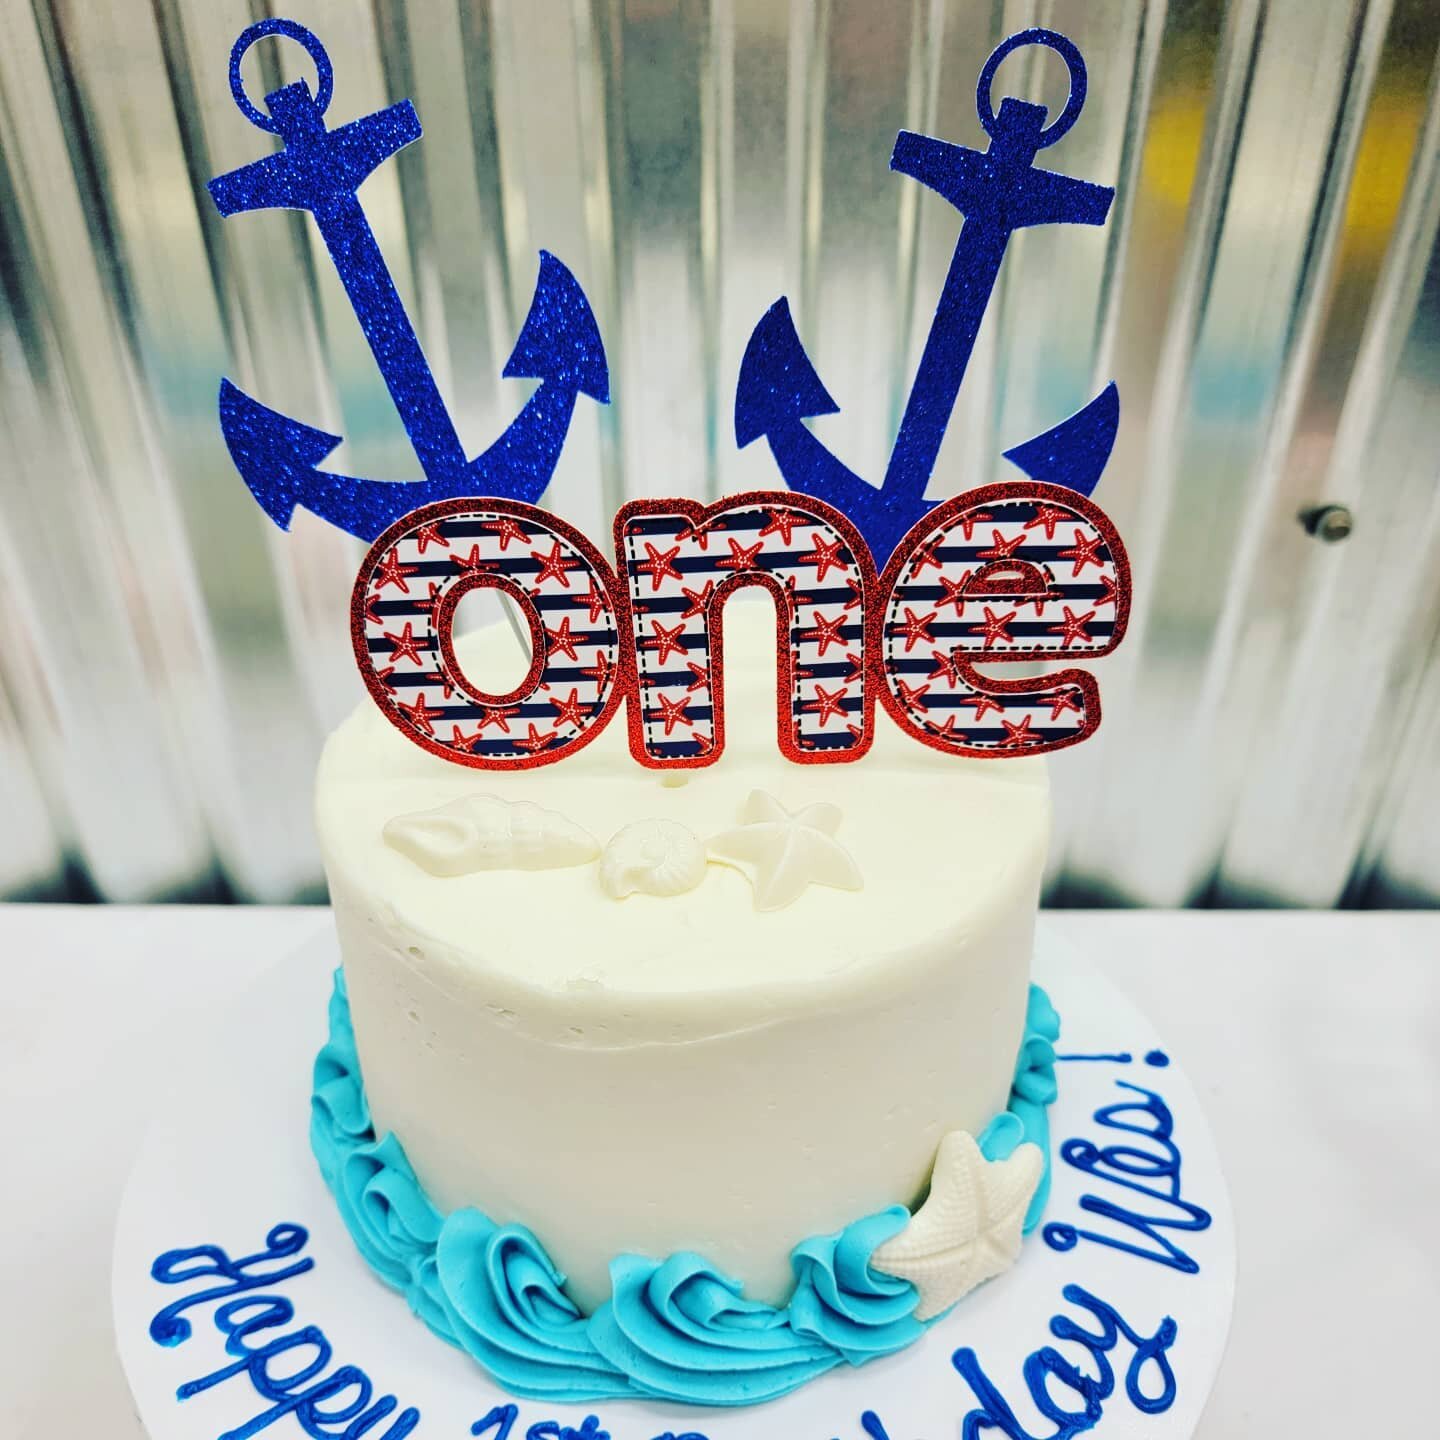 Happy 1st birthday Wes! We love the nautical theme. 

#sweetnessinyourlife #bestcakeson30a #smashcakes #seagroveplaza #southwalton #30alocalbusiness #madefromscratch #madewithlove #sweeton30a